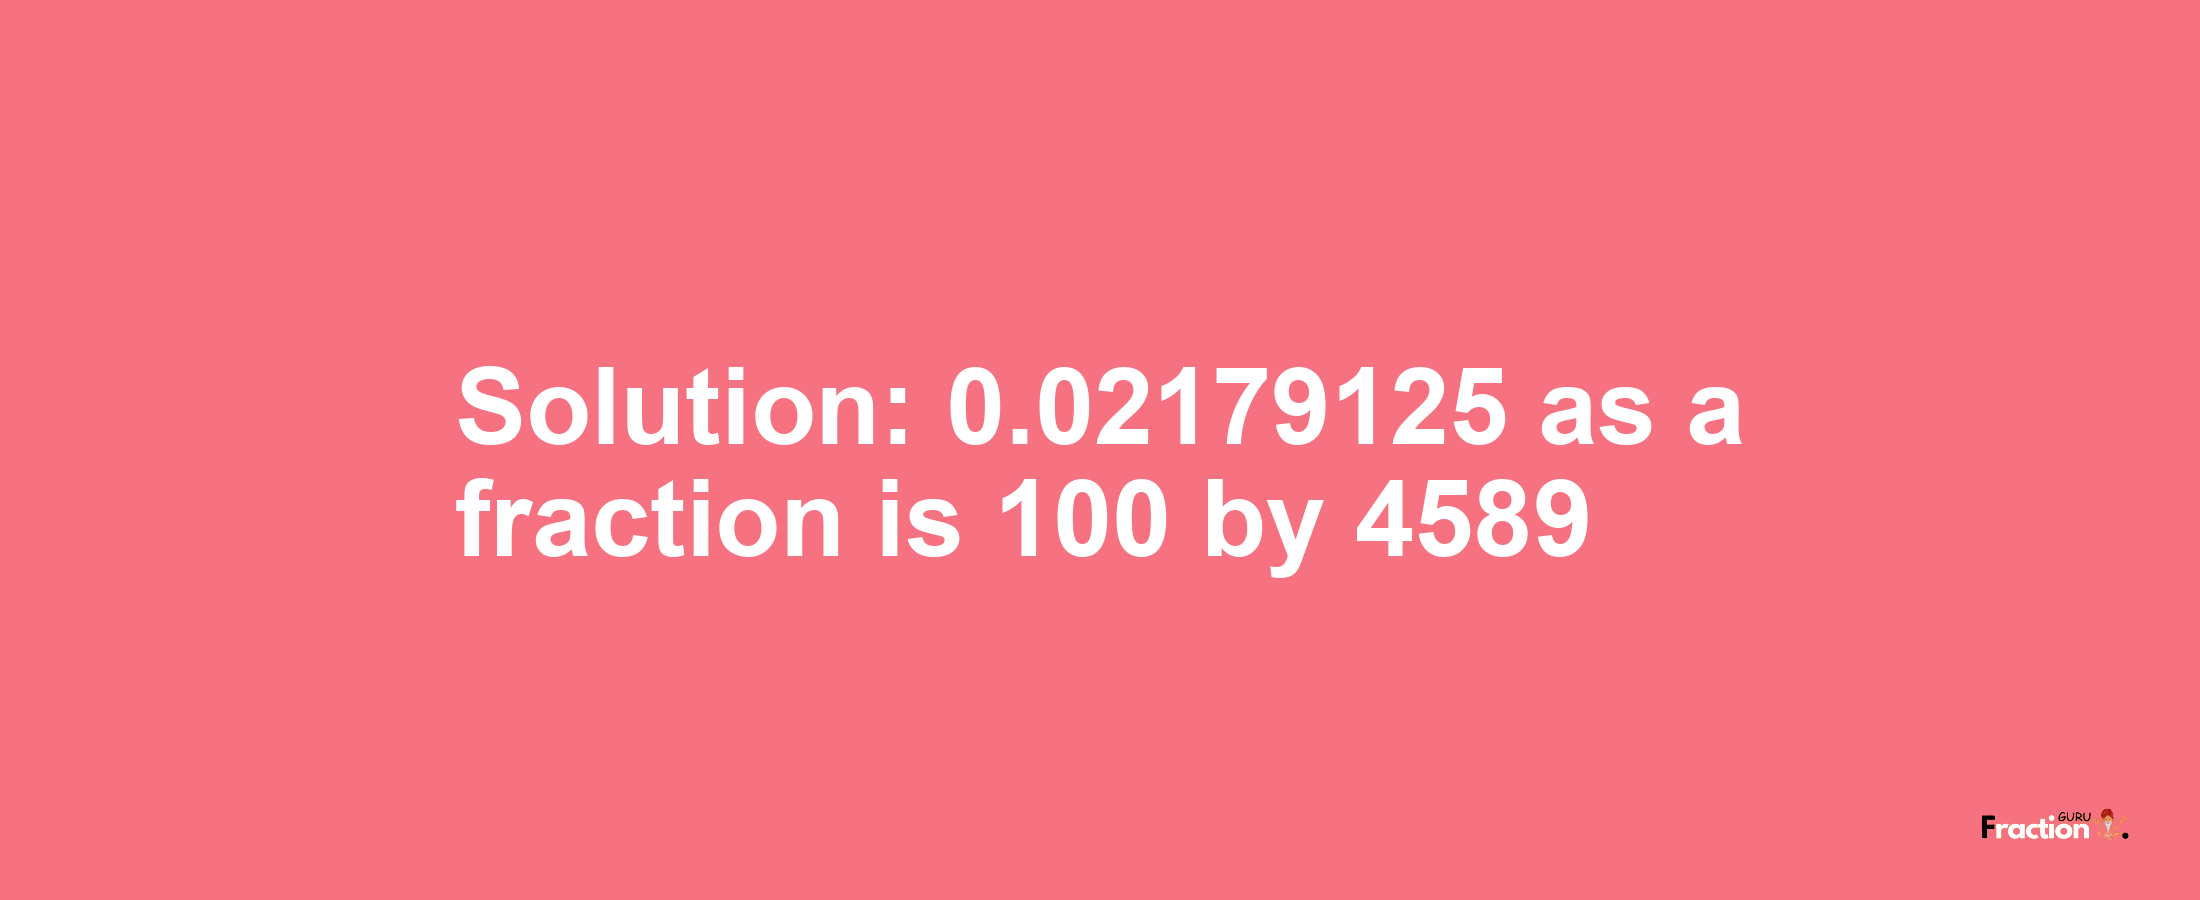 Solution:0.02179125 as a fraction is 100/4589